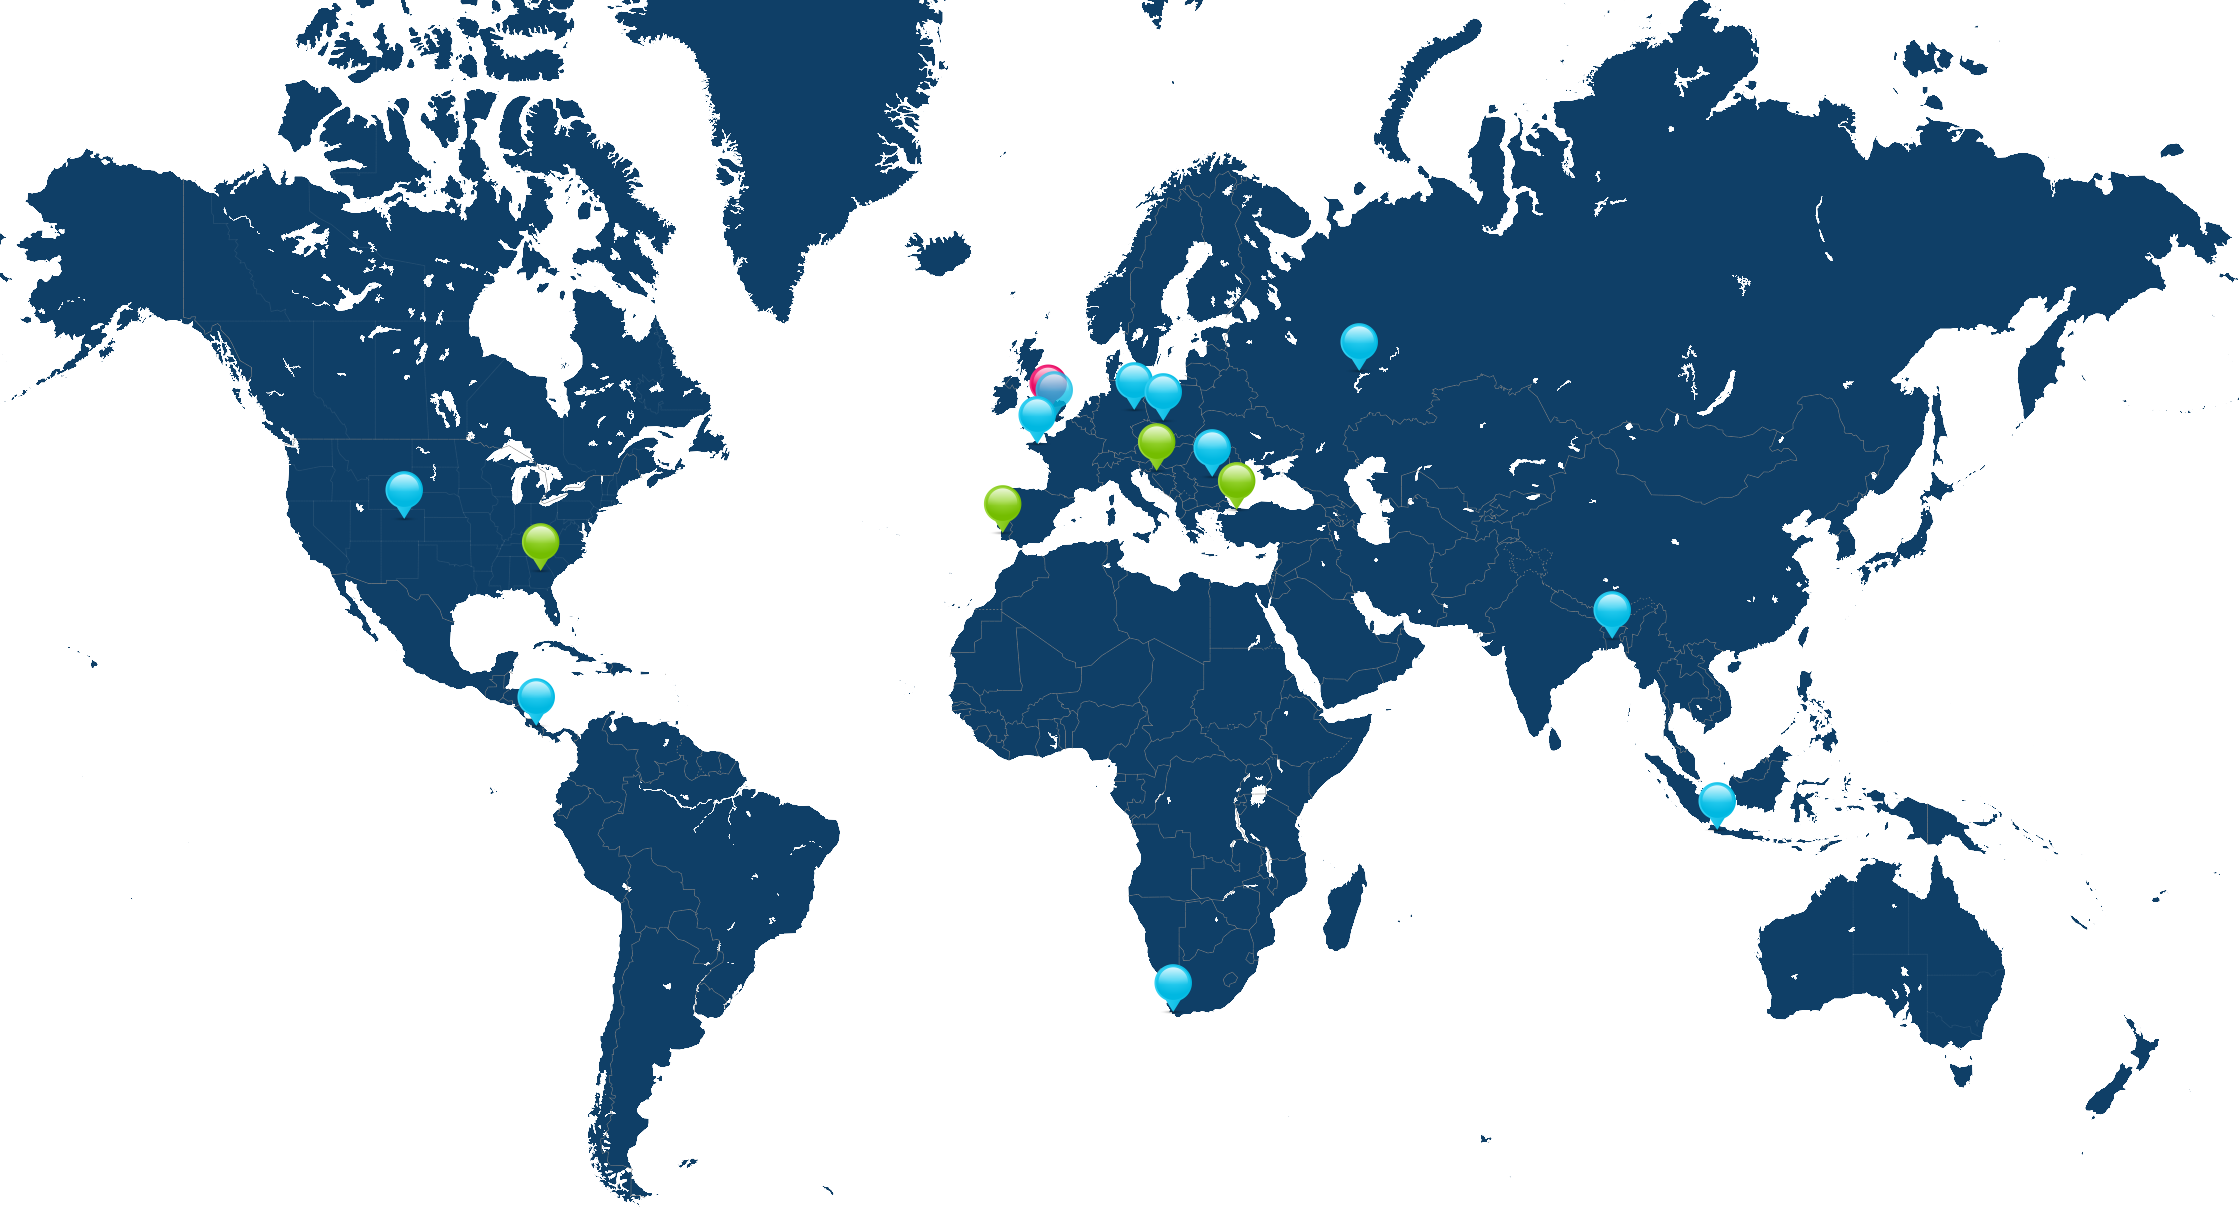 World map showing the locations of Dan, his immediate team, and its parent team. There's a cluster of nine pins Europe, a few pins further East in Russia and Indonesia, one in Cape Town, two in North America, and one in Central America.